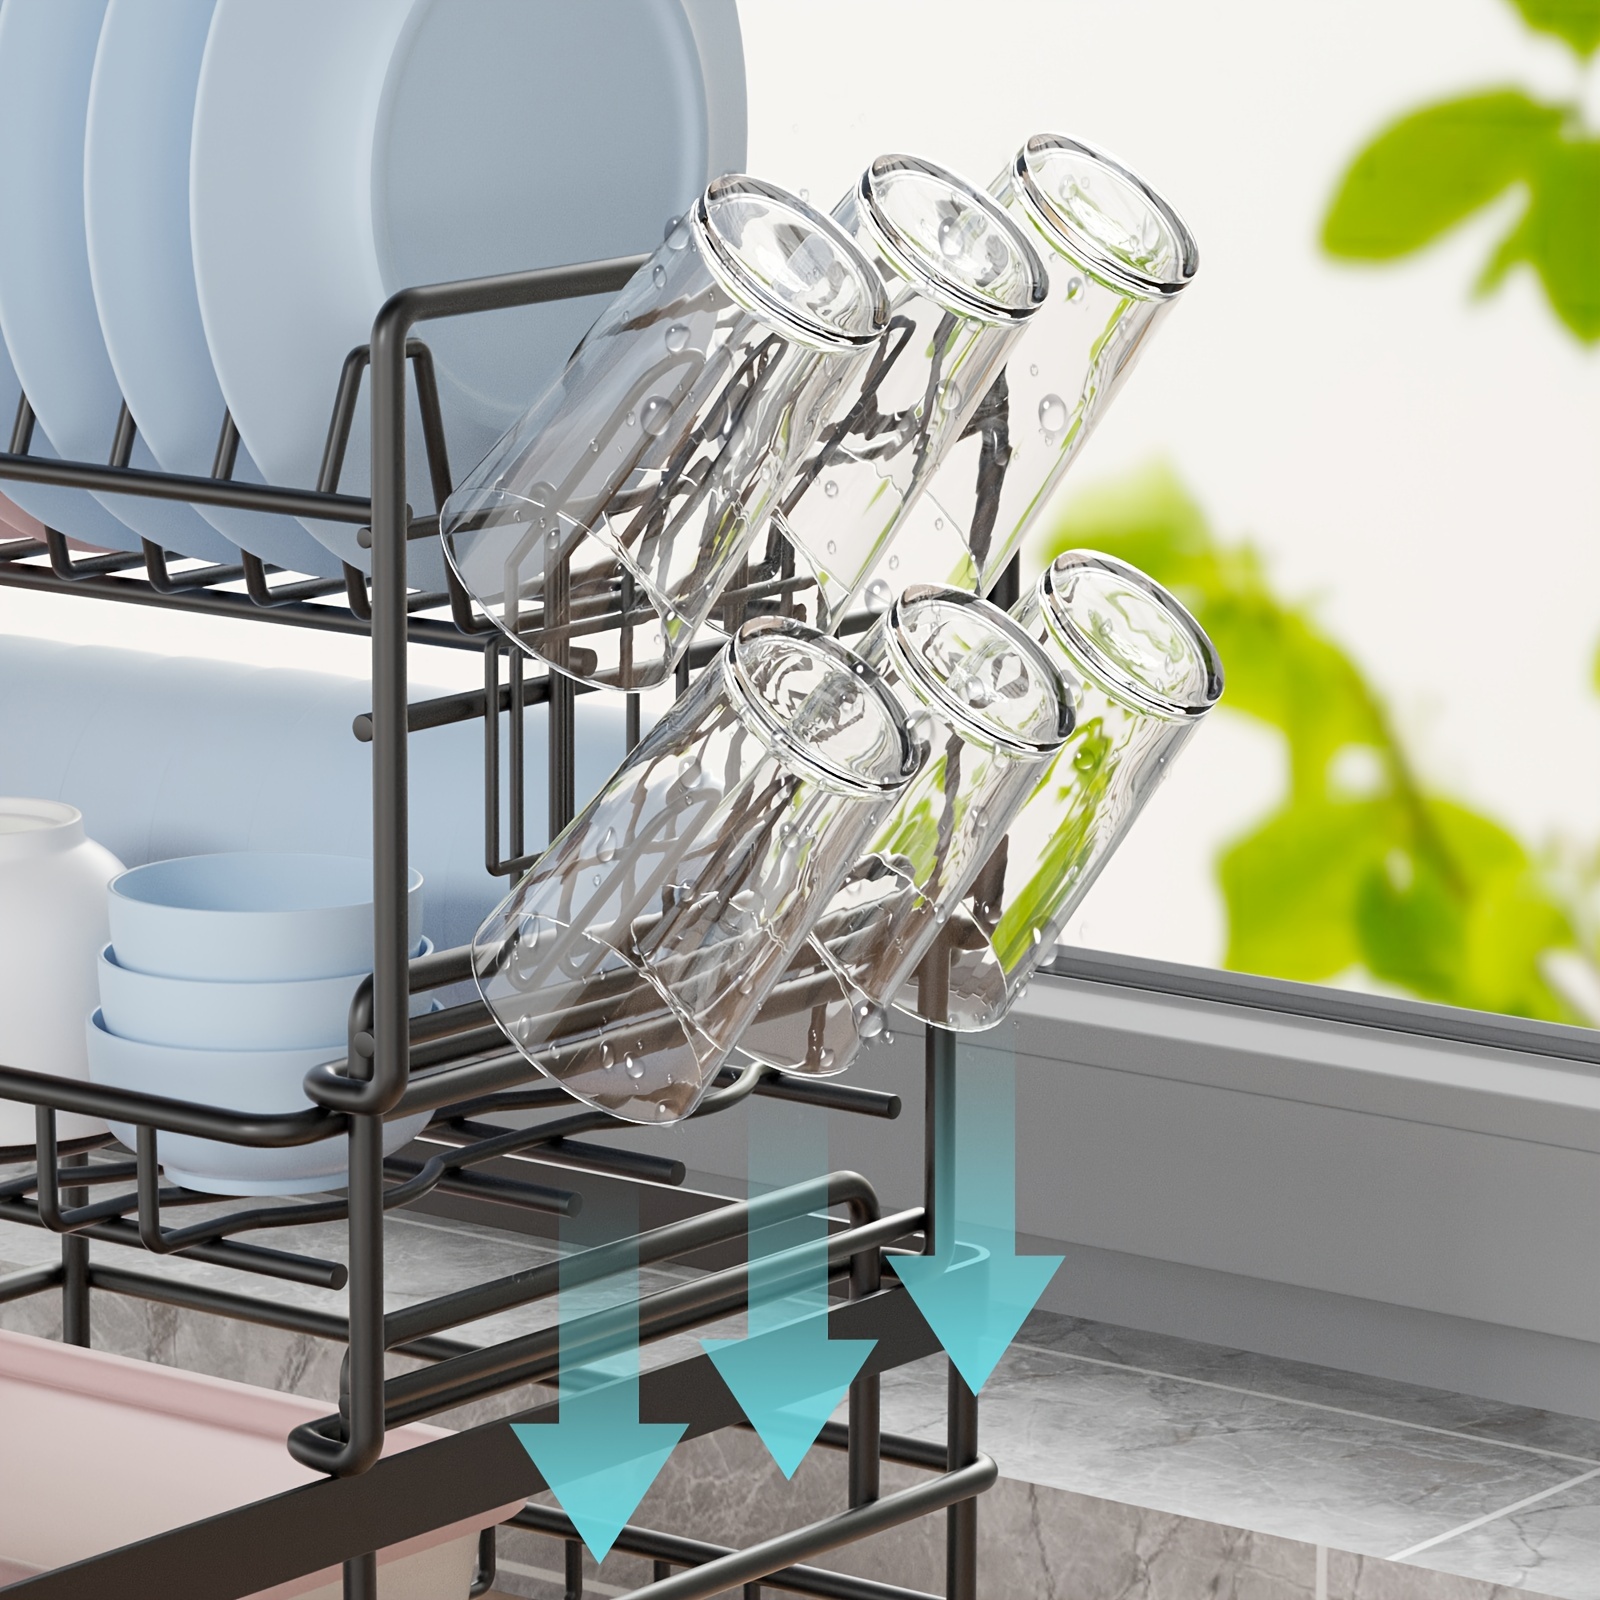 3 Tier Dish Rack, Stainless Steel Large Dish Drying Rack and